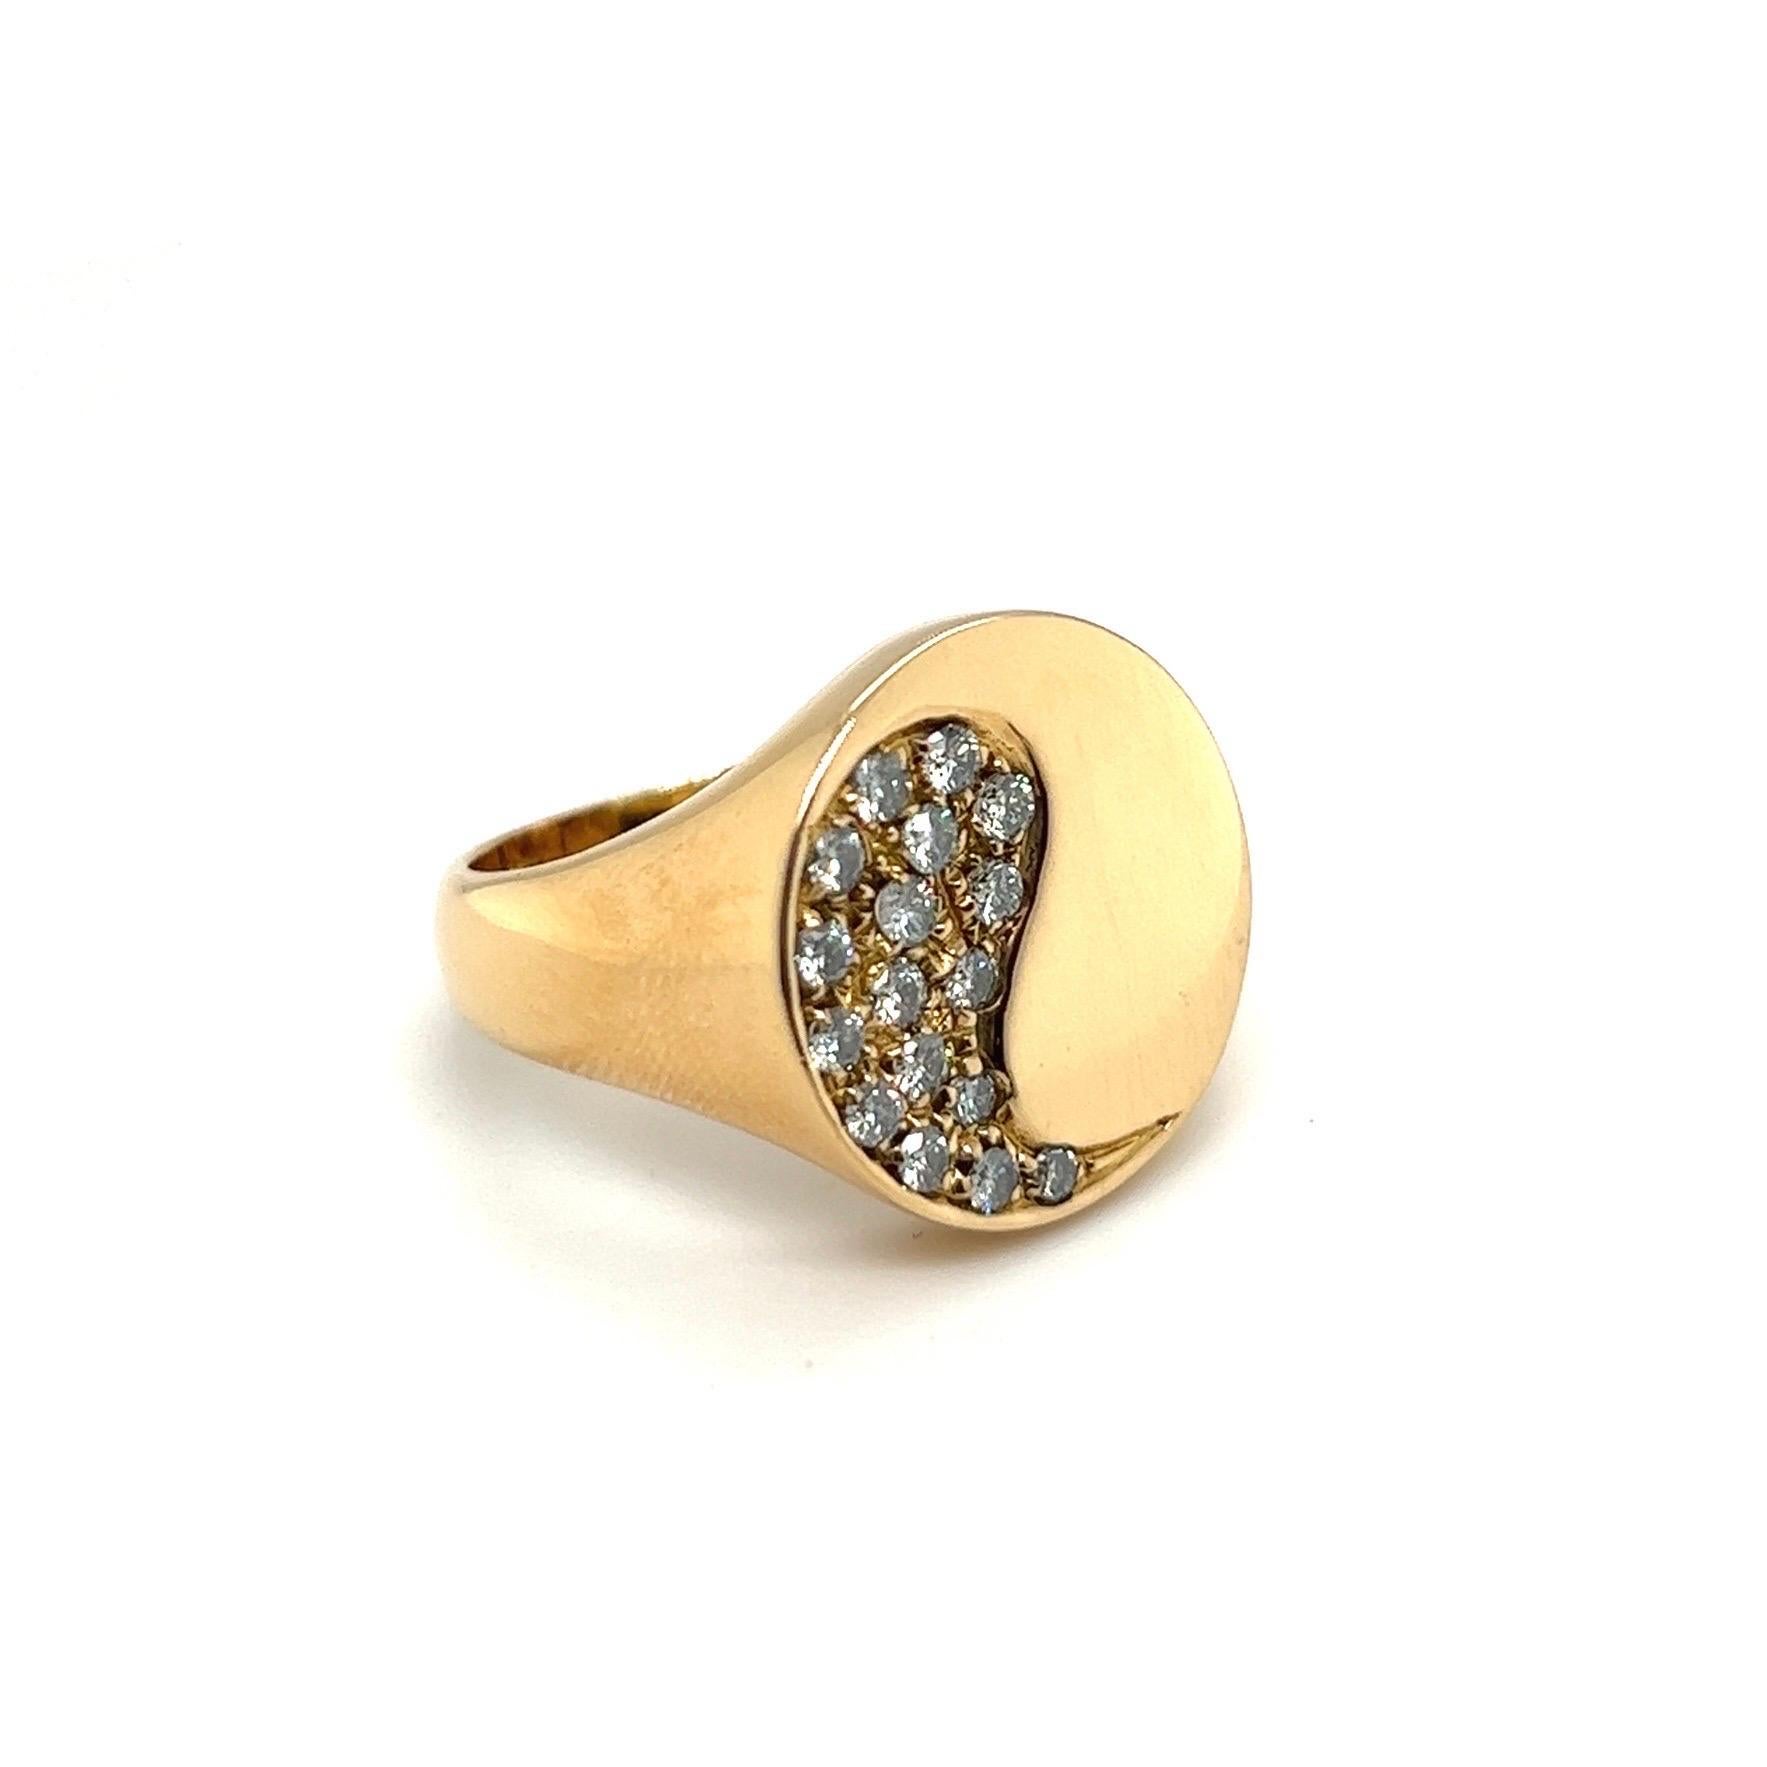 Mystical 18 karat yellow gold and diamond yin and yang cocktail ring.

Crafted in 18 karat yellow gold, the ring head designed as a yin and yang motif in high polished gold, respectively decorated with 17 brilliant-cut diamonds totalling circa 0.43